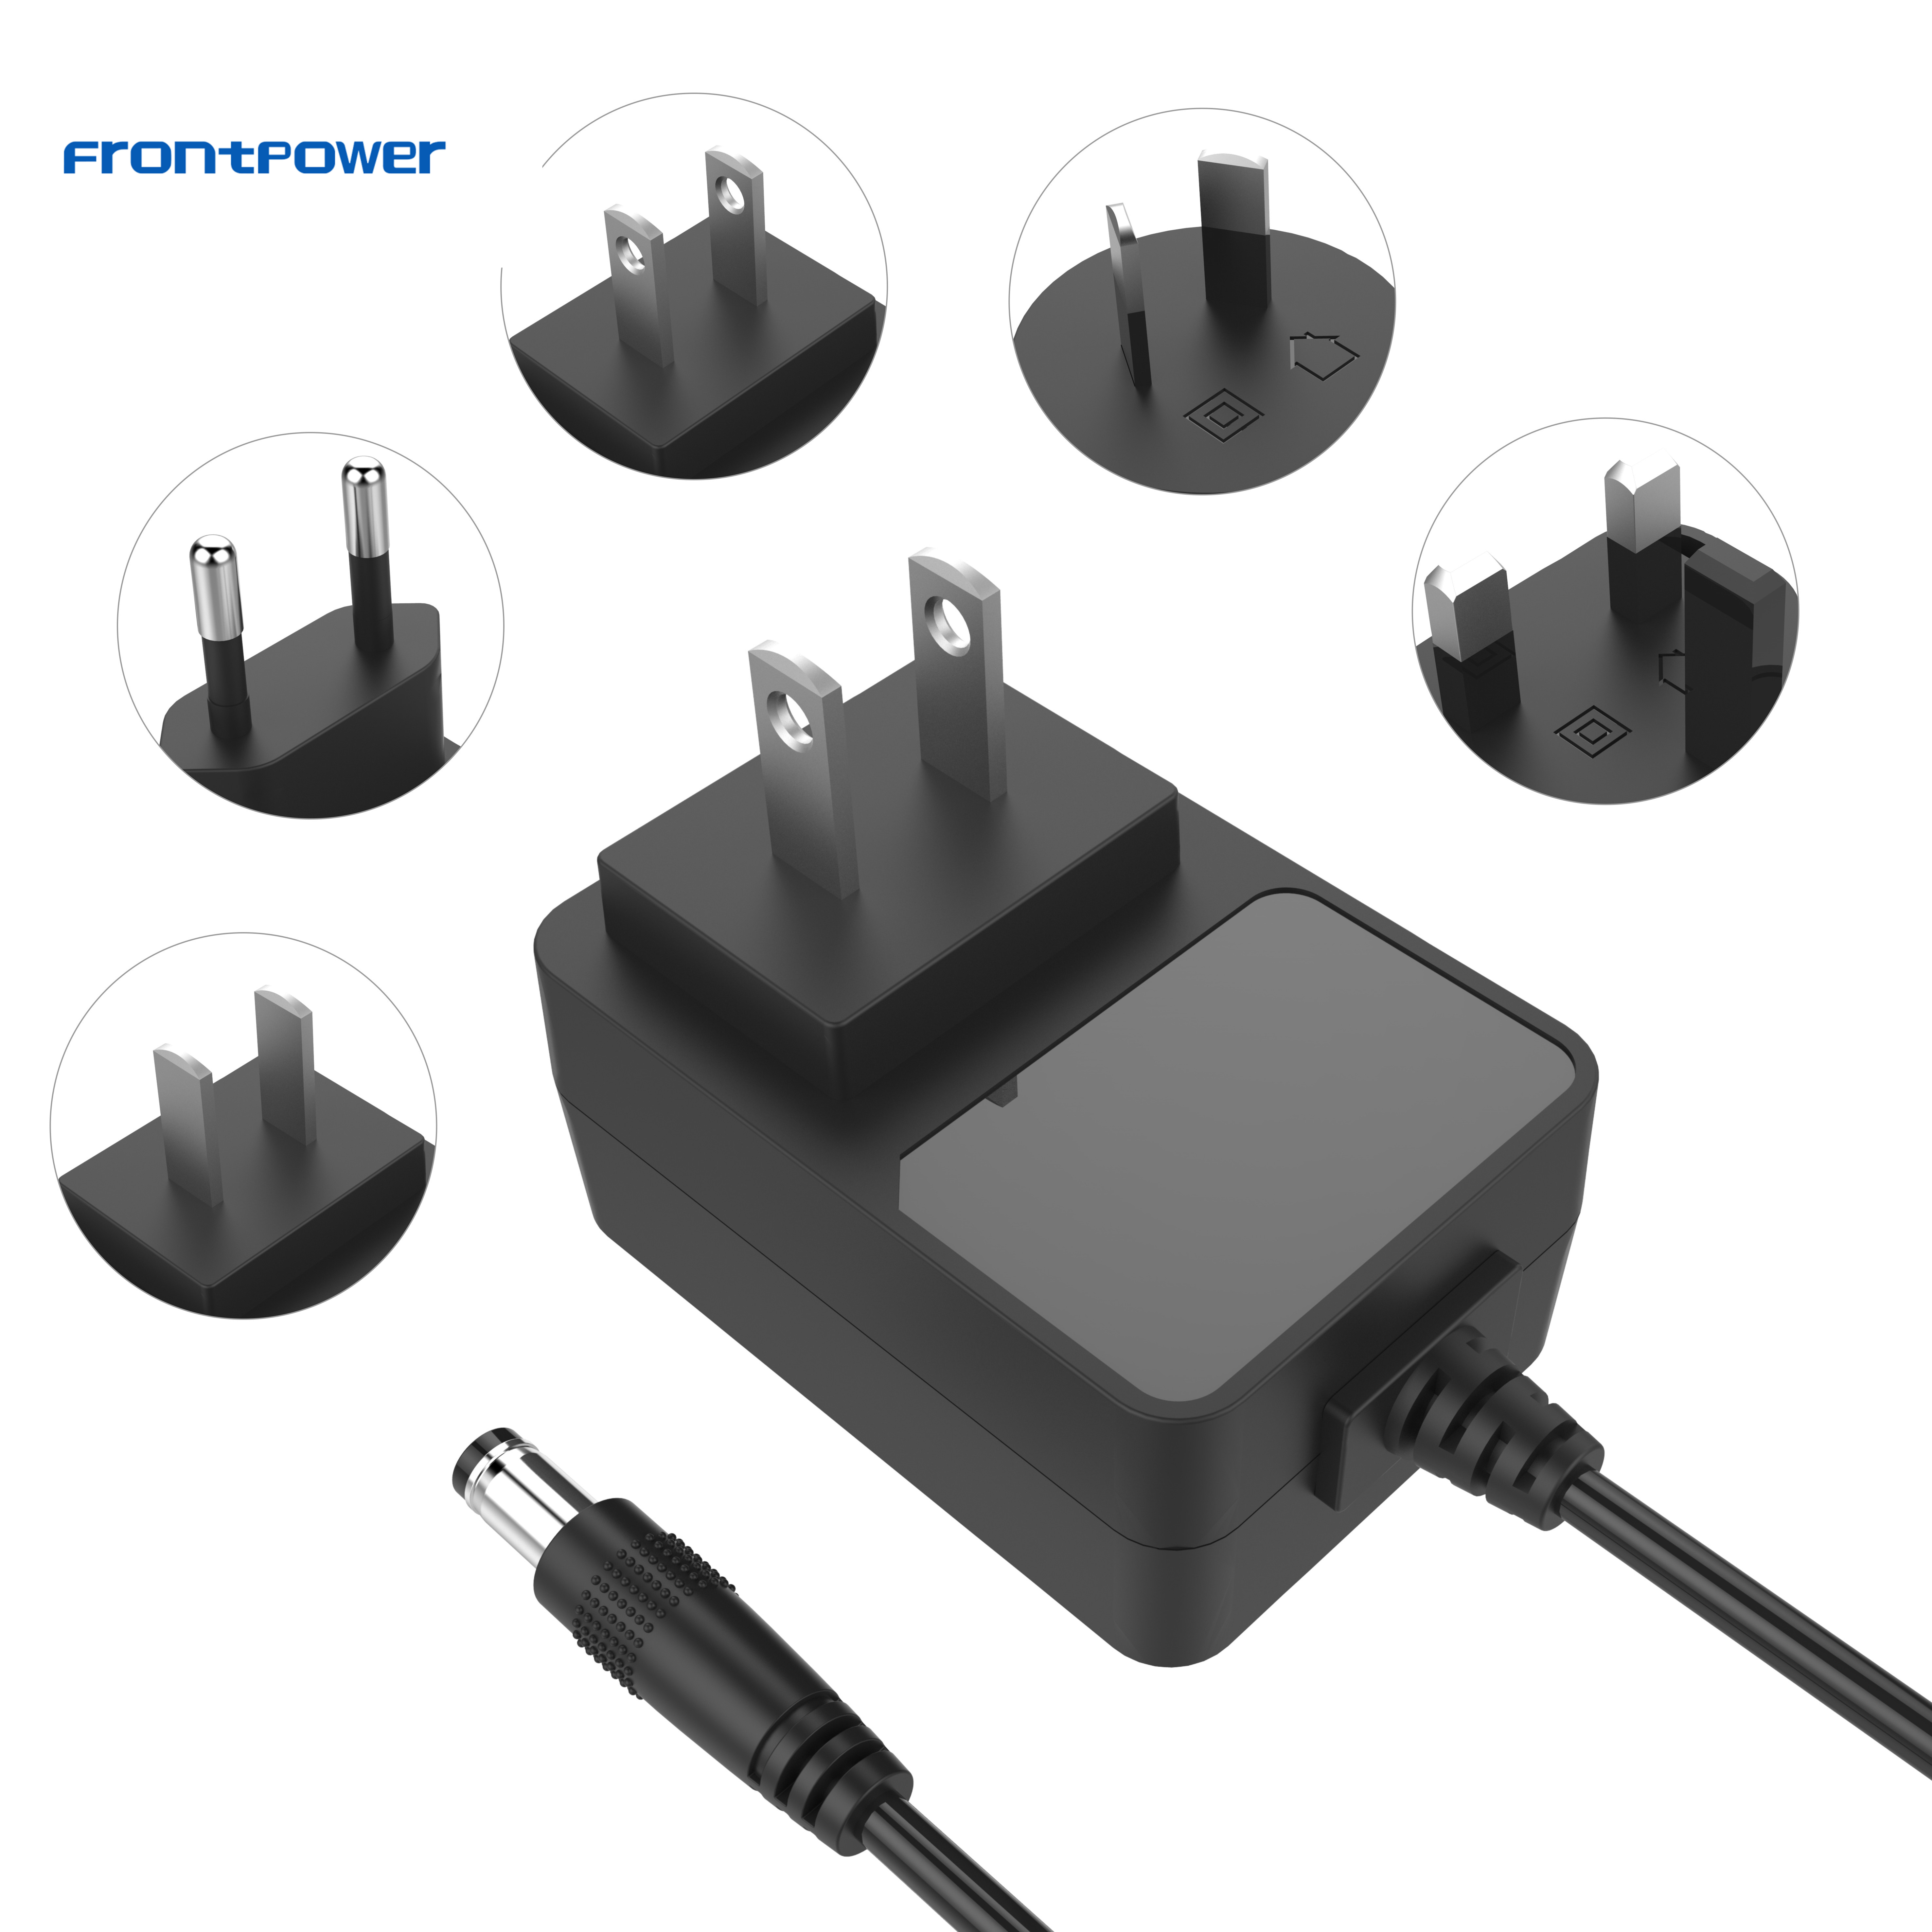 5V 6V 8V 9V 12V 24V 1A 2A 3A US EU UK AU Plug Wall Power Adapter Supply Switch ACDC Universal Charger SMPS for Phone Wifi Router